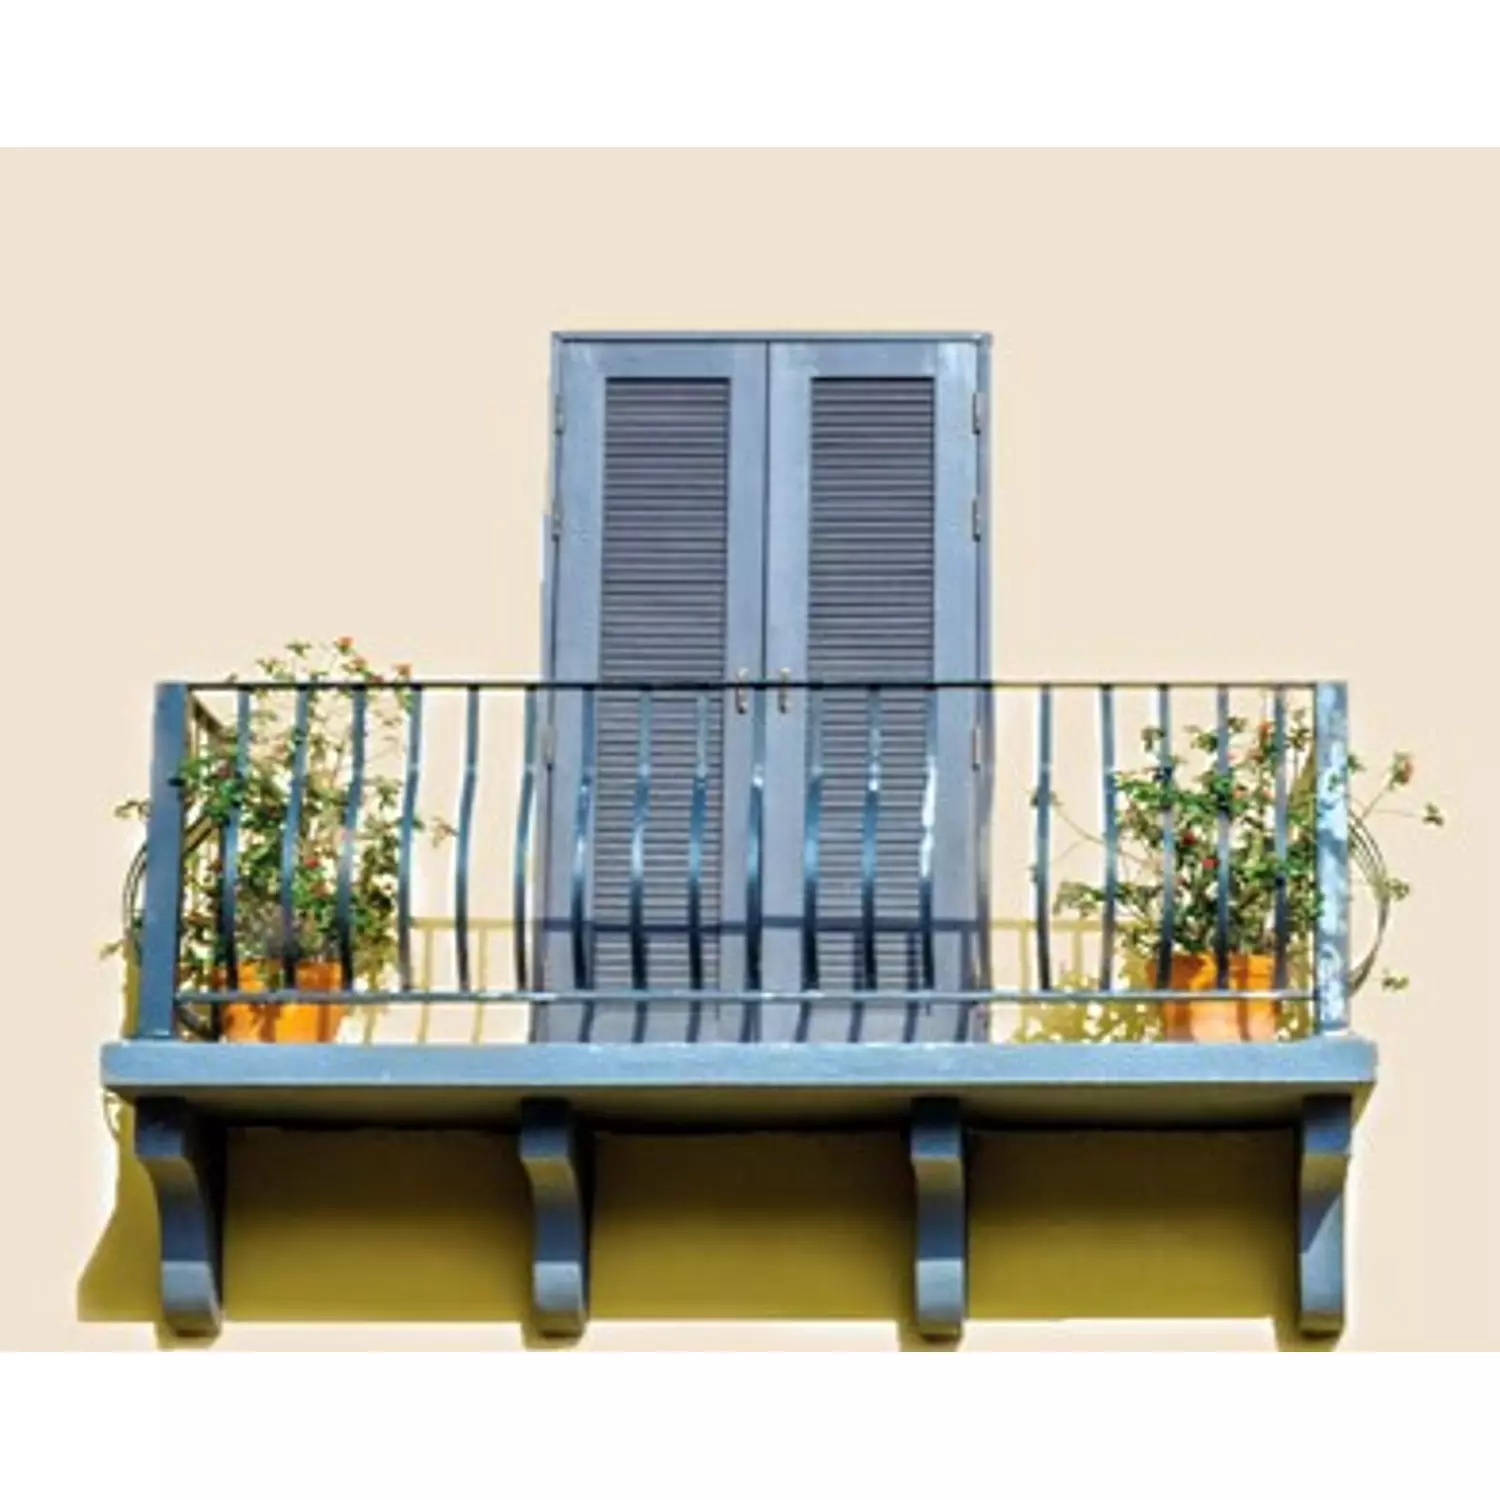 Sprinkle a small balcony hover image